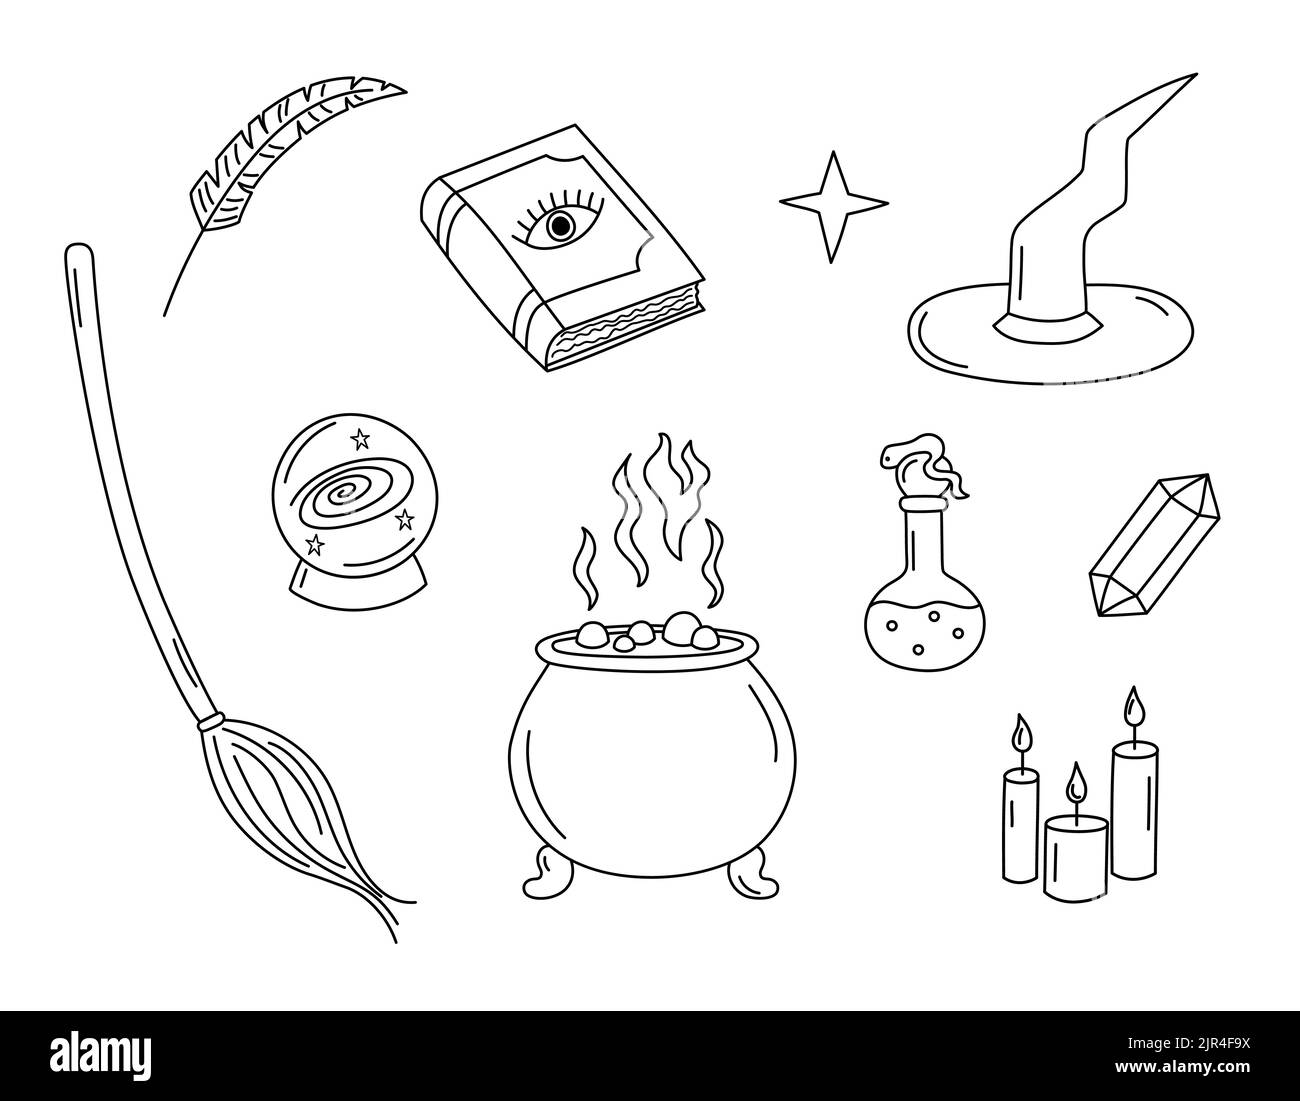 Witchcraft doodles set. Witch attributes magic ball, spell book, cauldron, broom, hat. Halloween symbols isolated. Outline hand drawn vector illustrat Stock Vector